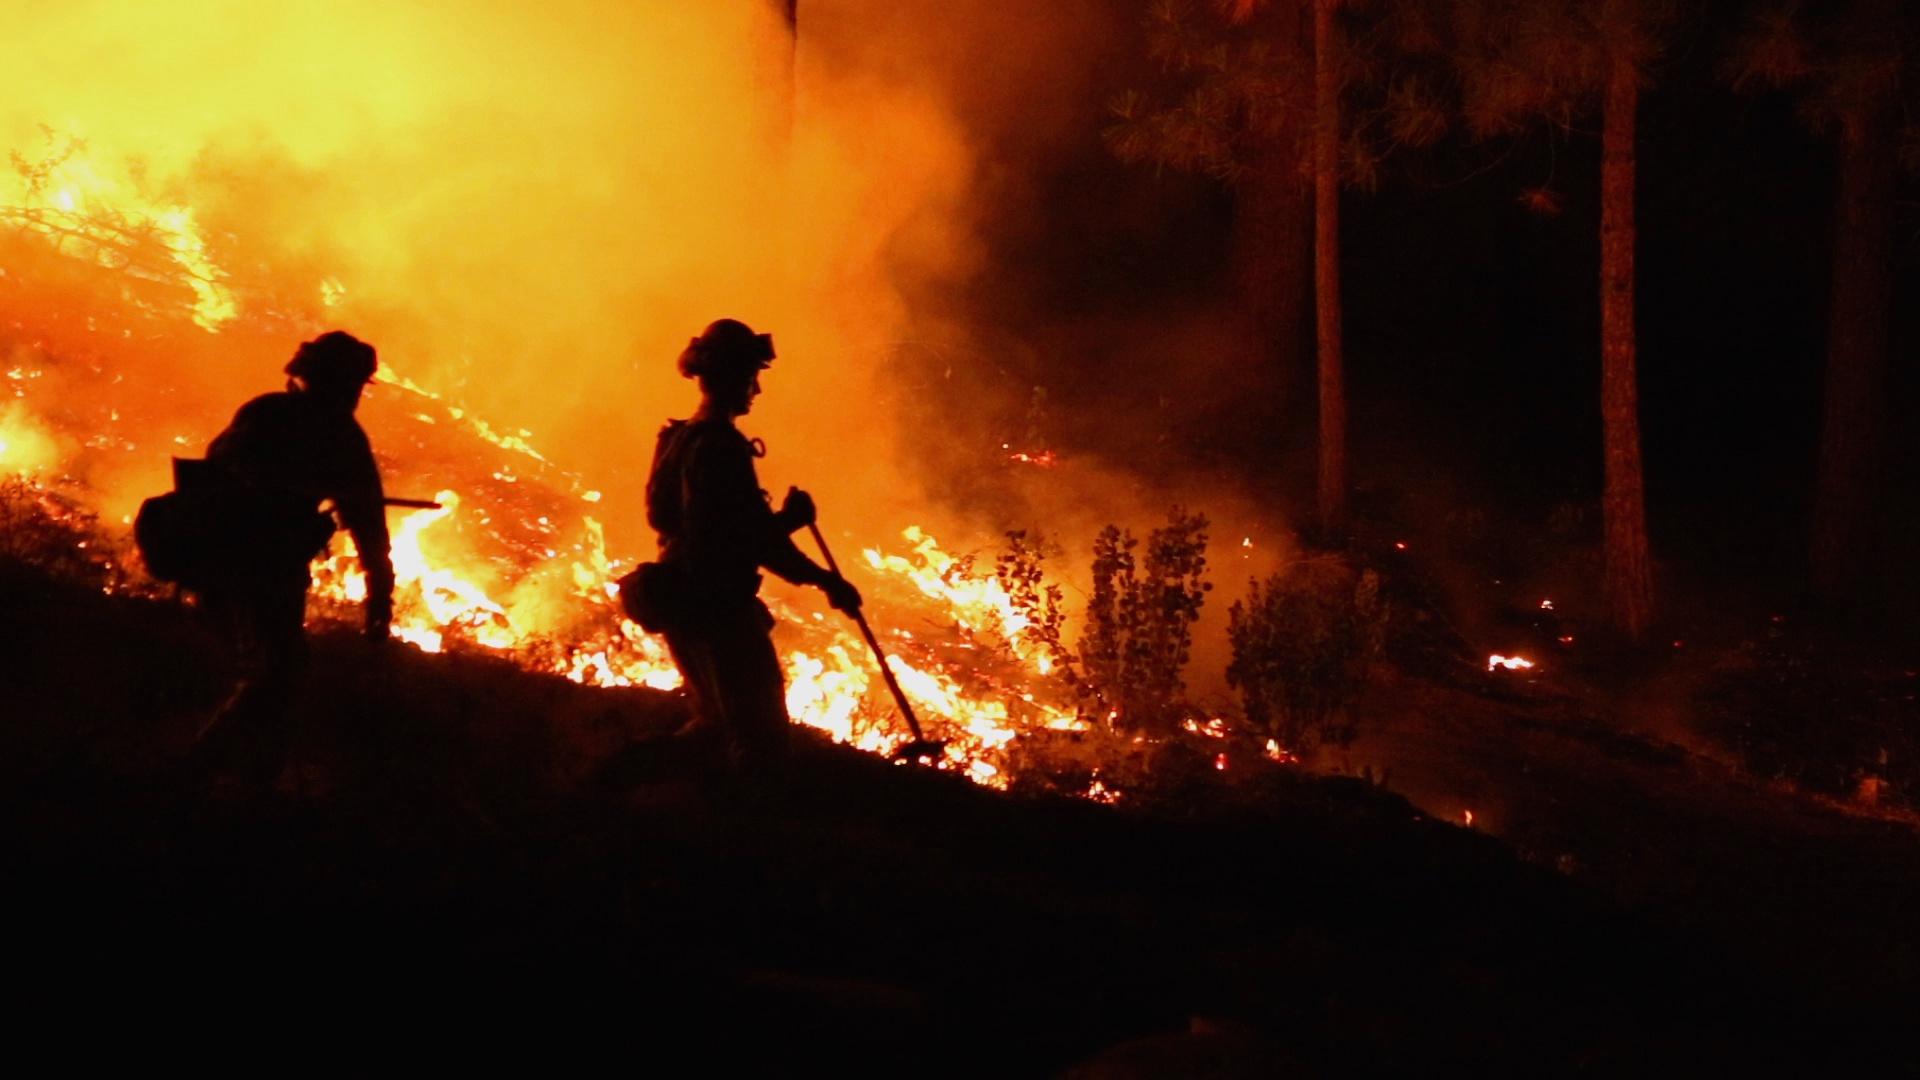 Firefighters fighting a forest fire.